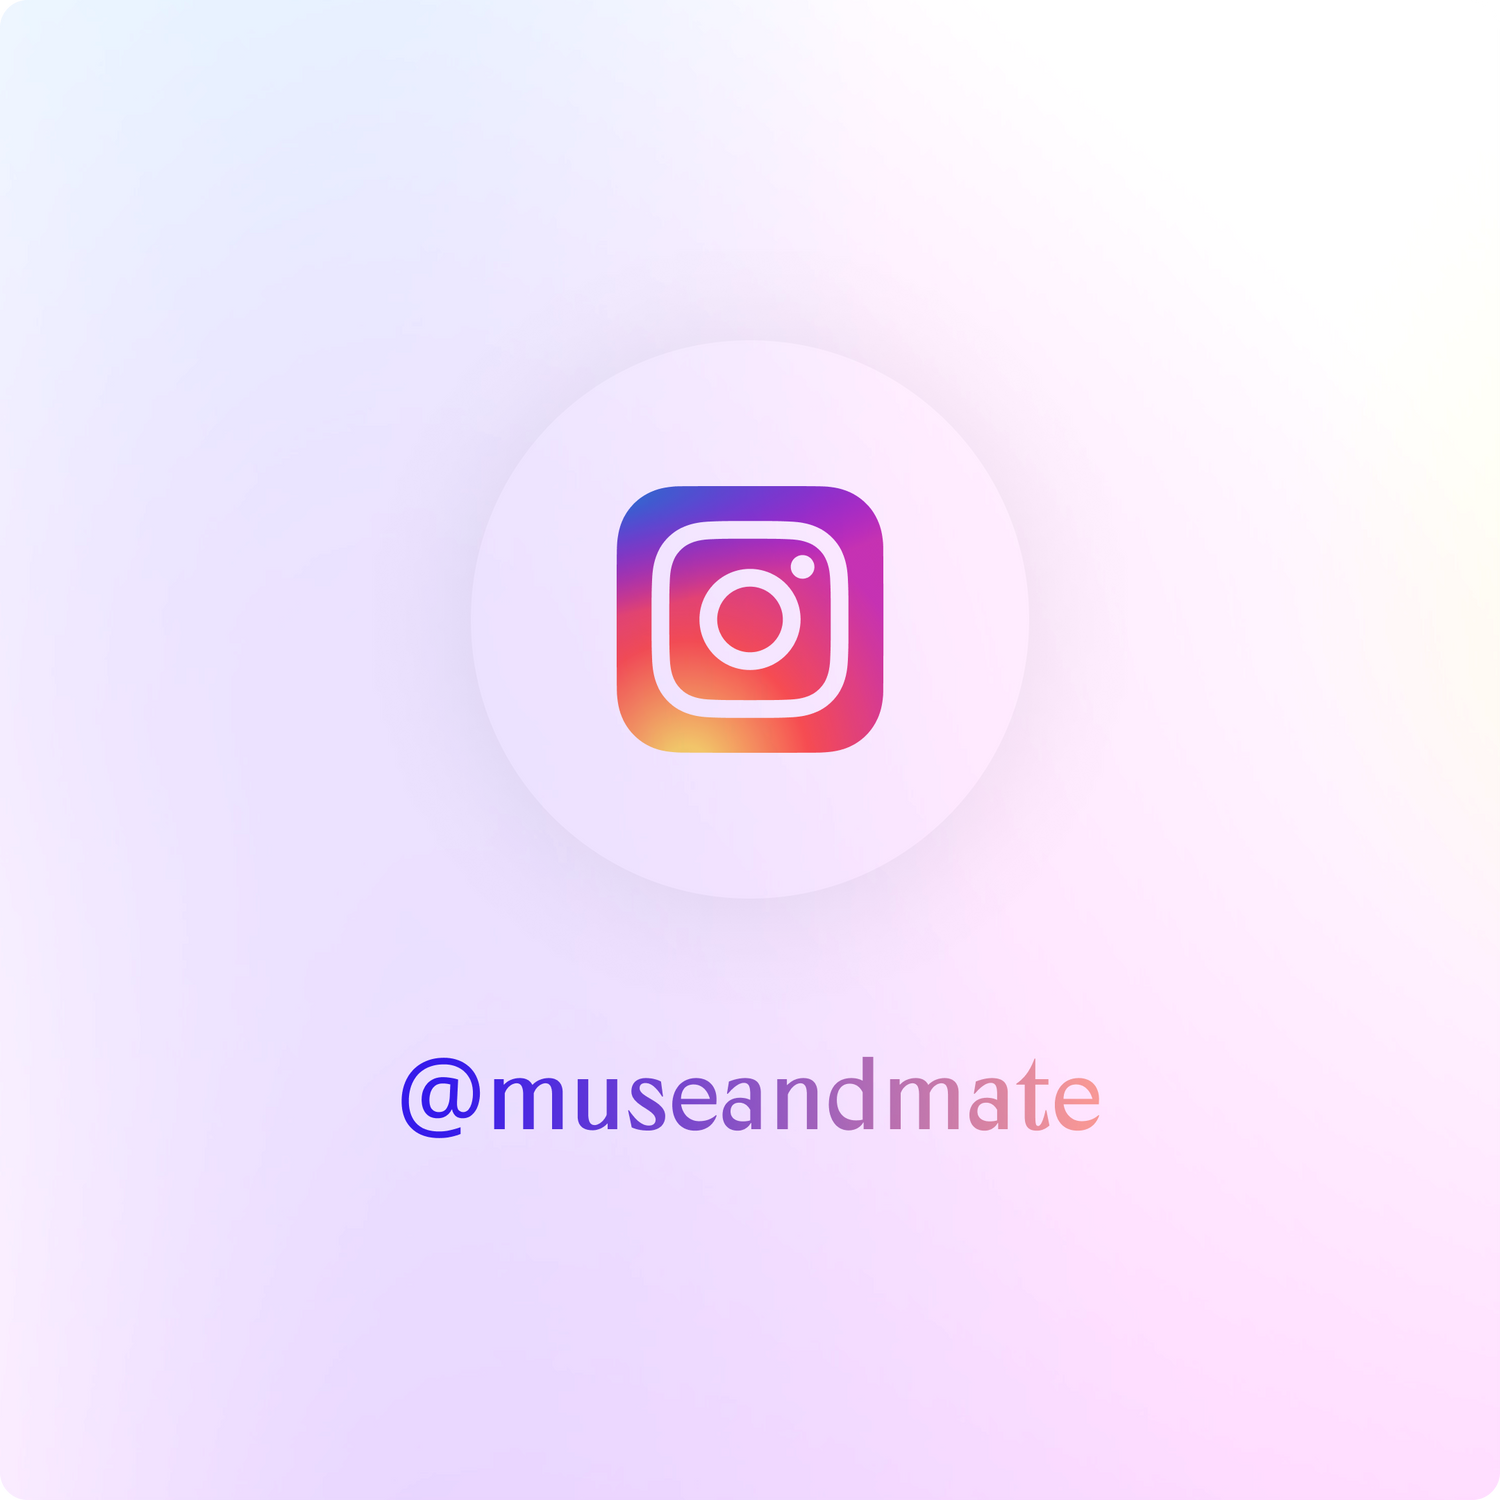 Muse and Mate's Instagram handle is @museandmate